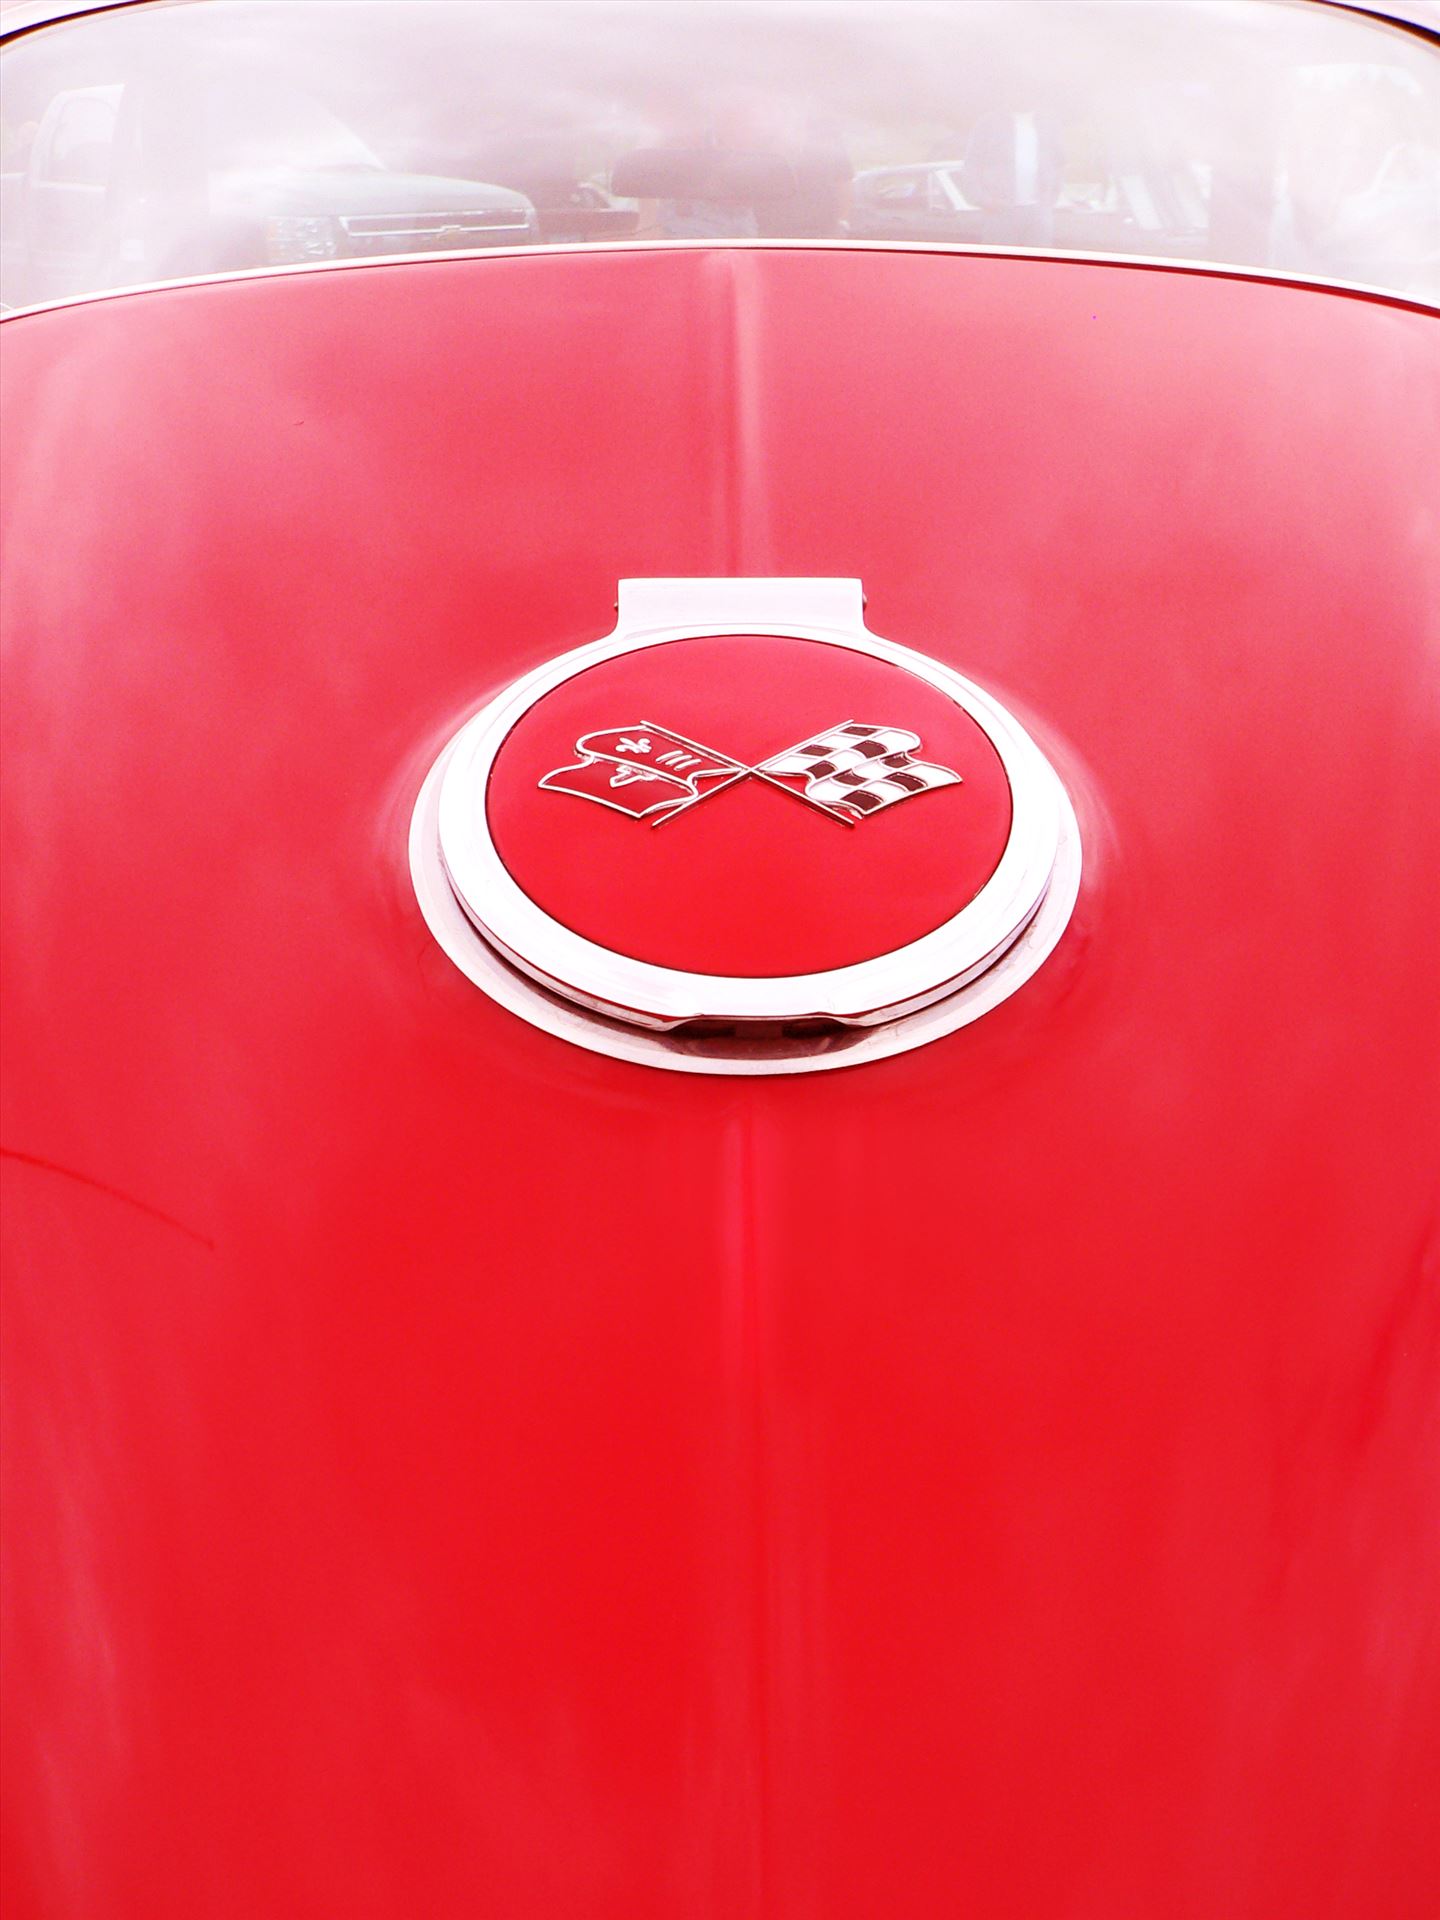 Vintage Fine Art Car Collection 07 - 1960's Corvette 327
These in Classic Red. Bam. by Studio 147